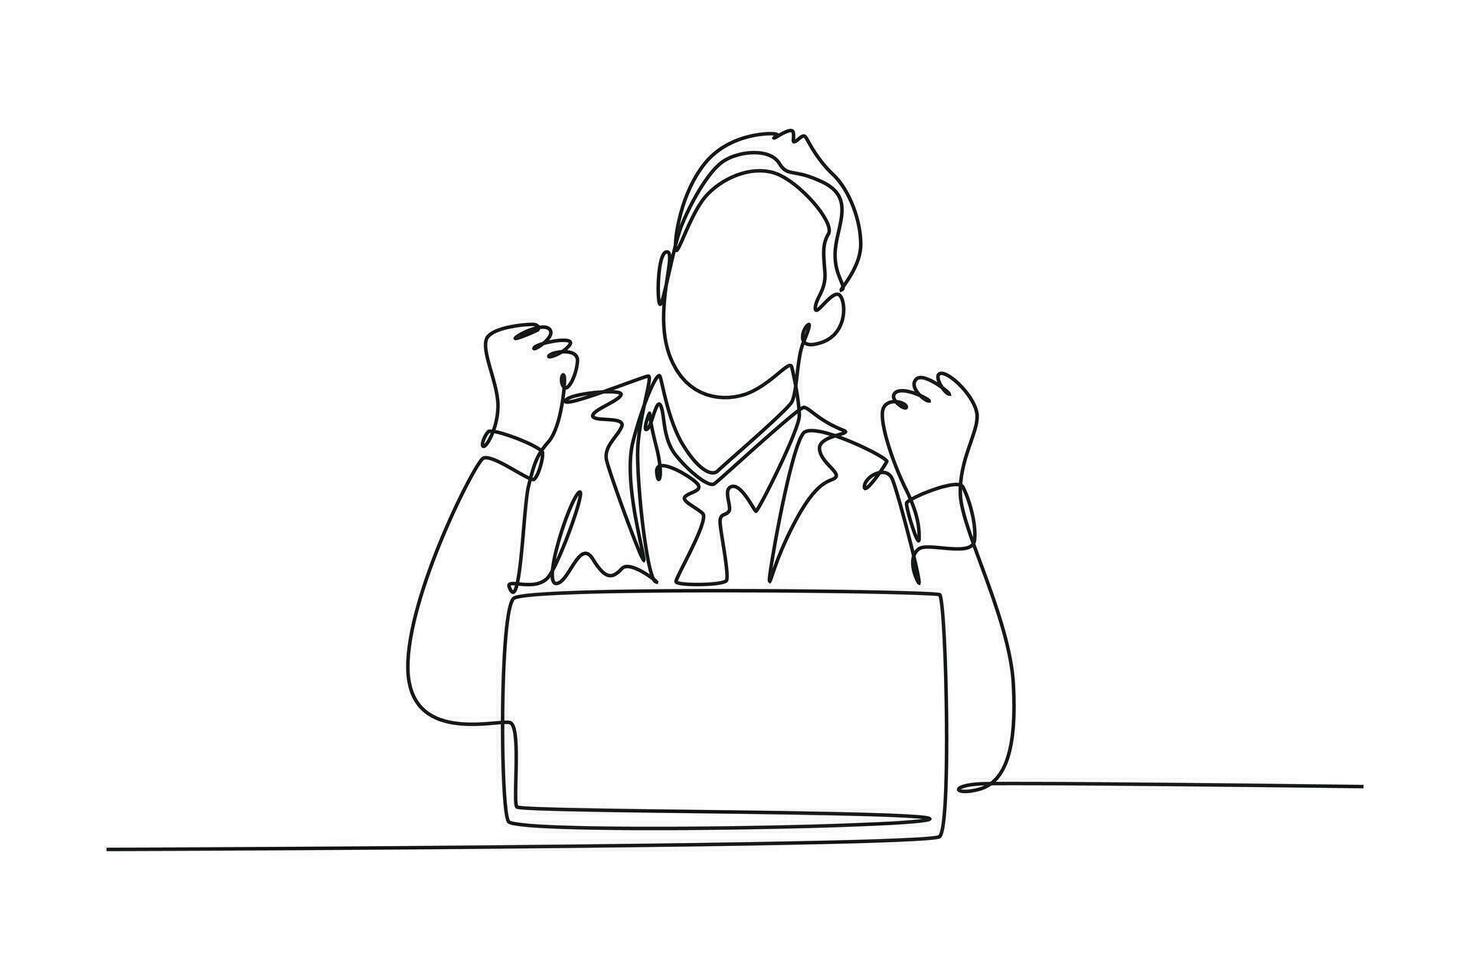 Continuous one line drawing of young happy business man sitting on chair and open laptop to read business contract agreement. Business deal concept. Single line draw design vector graphic illustration